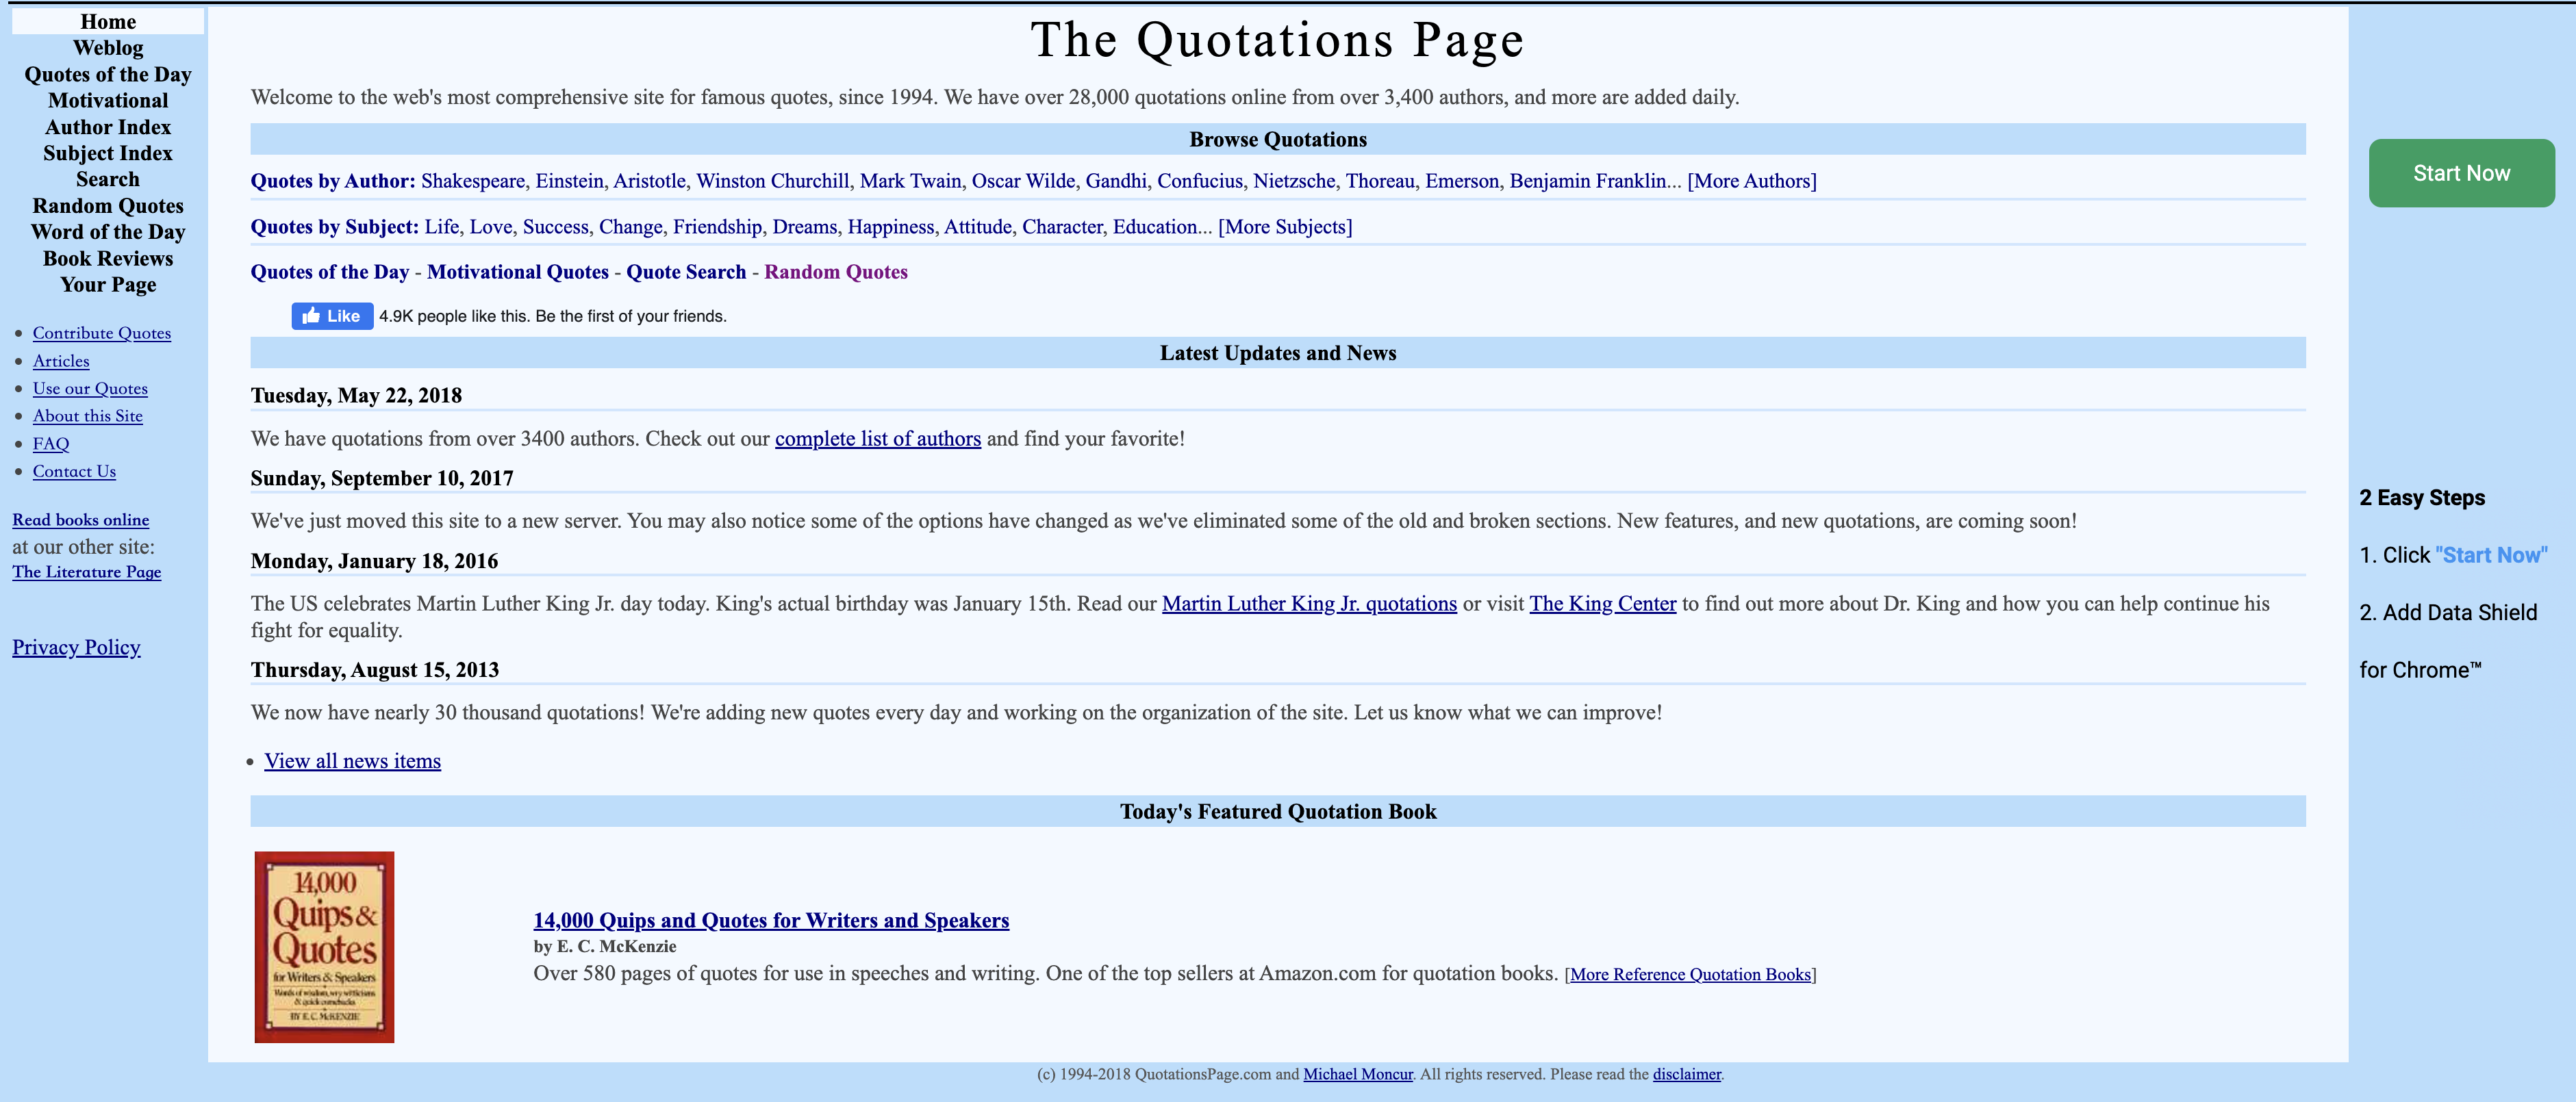 The Quotation Page